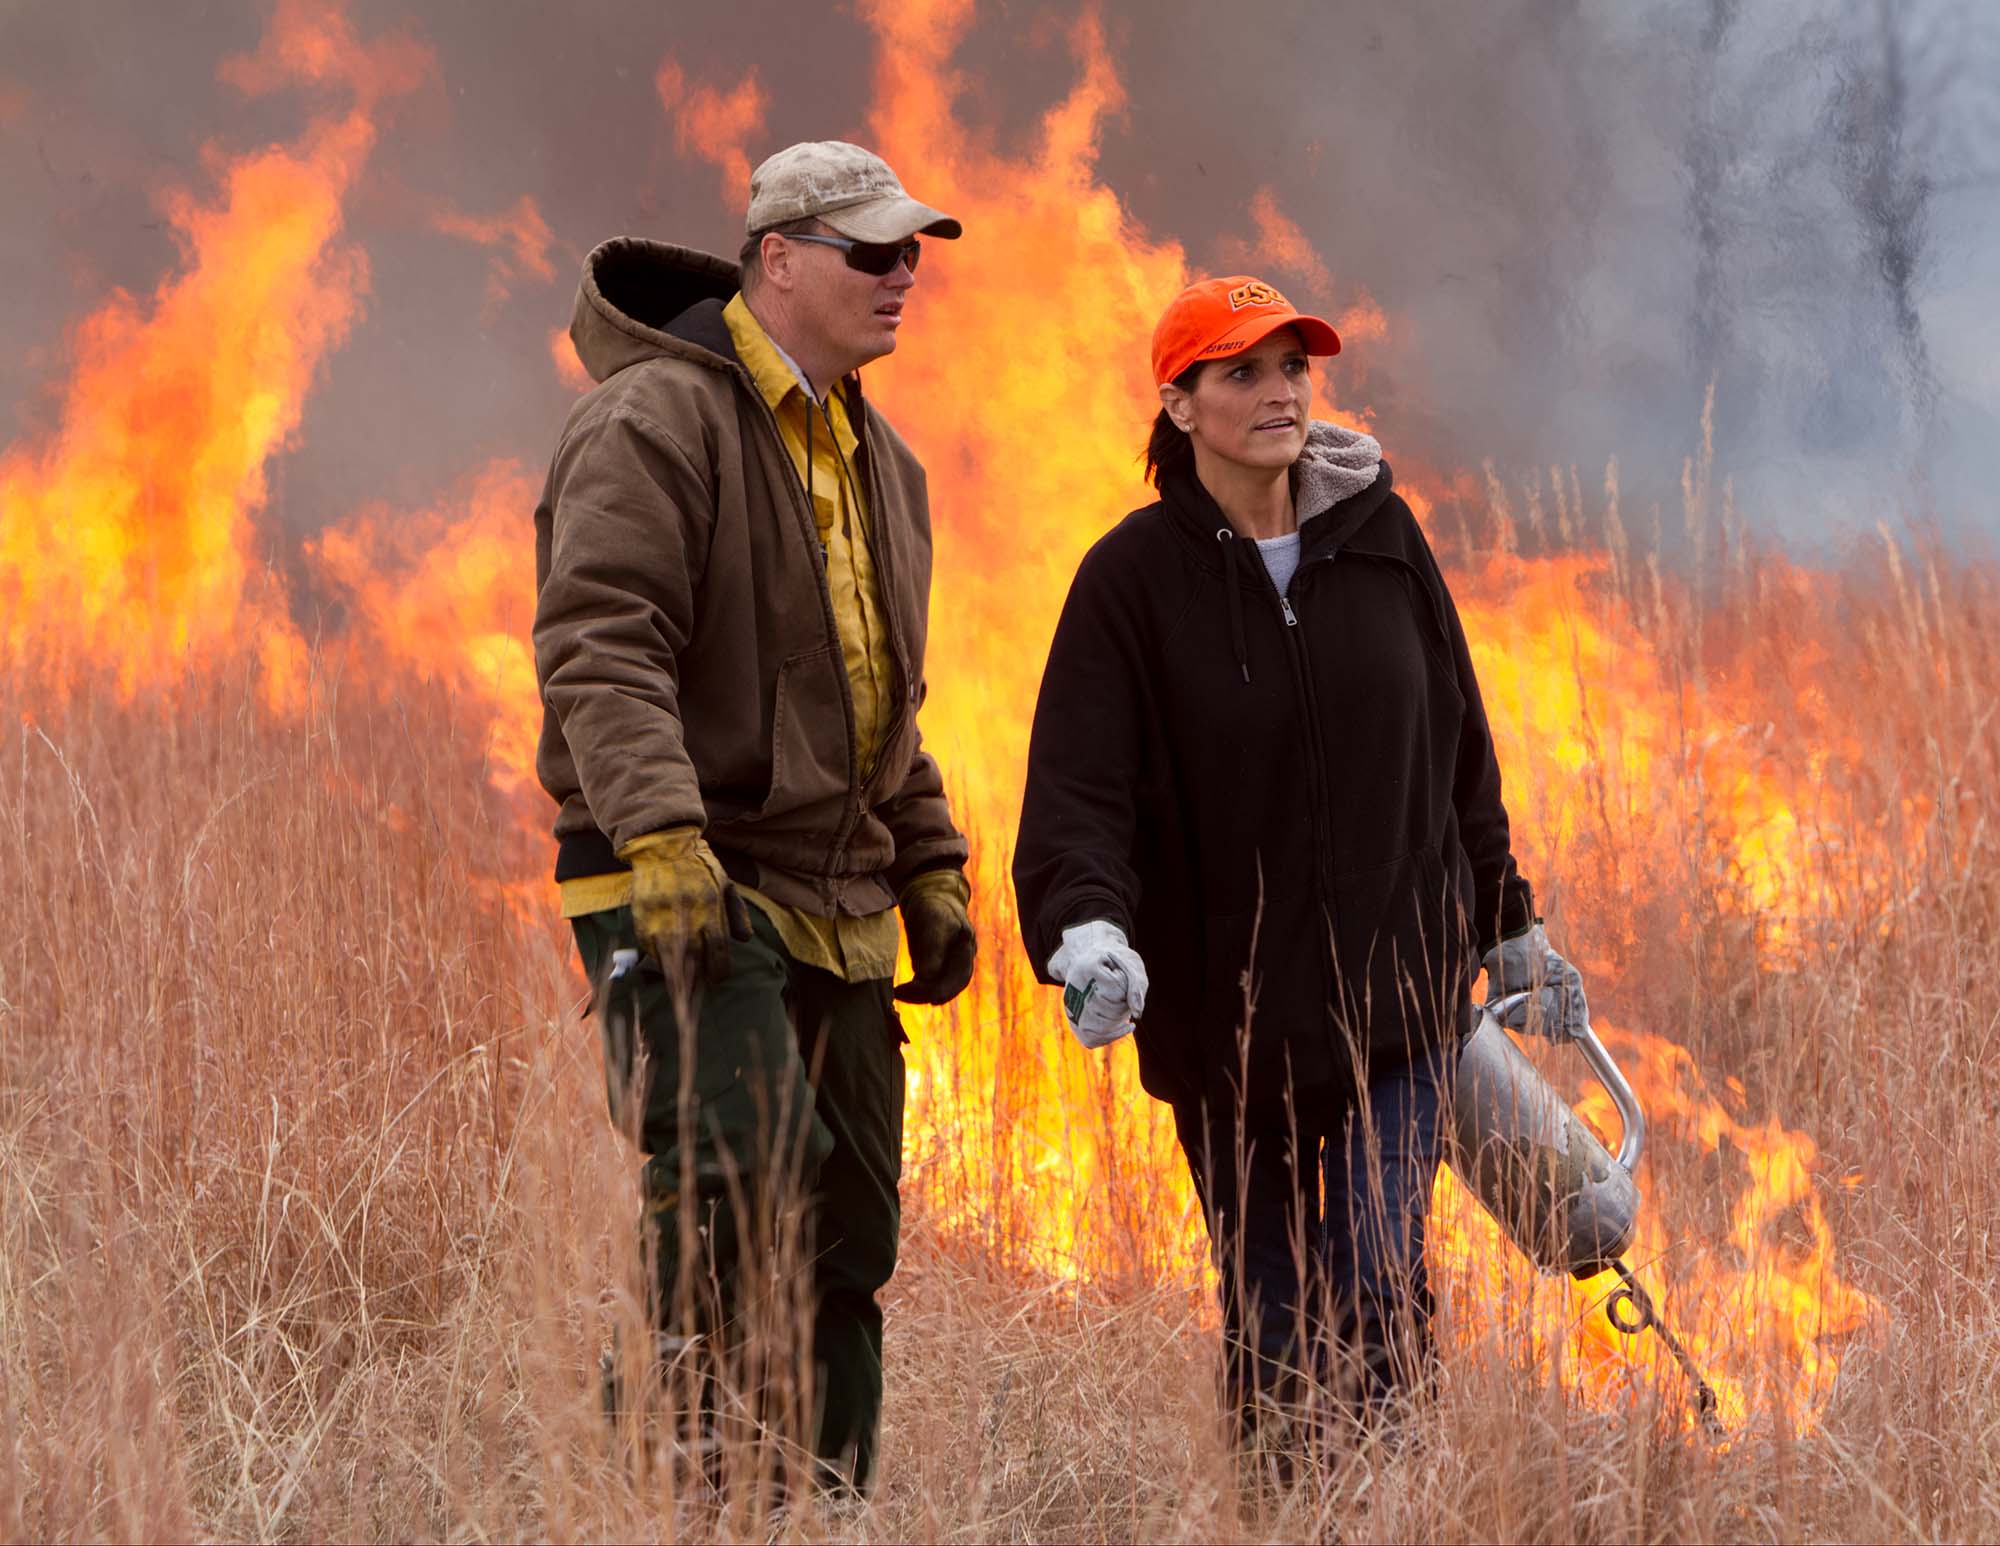 OSU's Department of Natural Resource Ecology and Management to Host Summer Fire Field Day